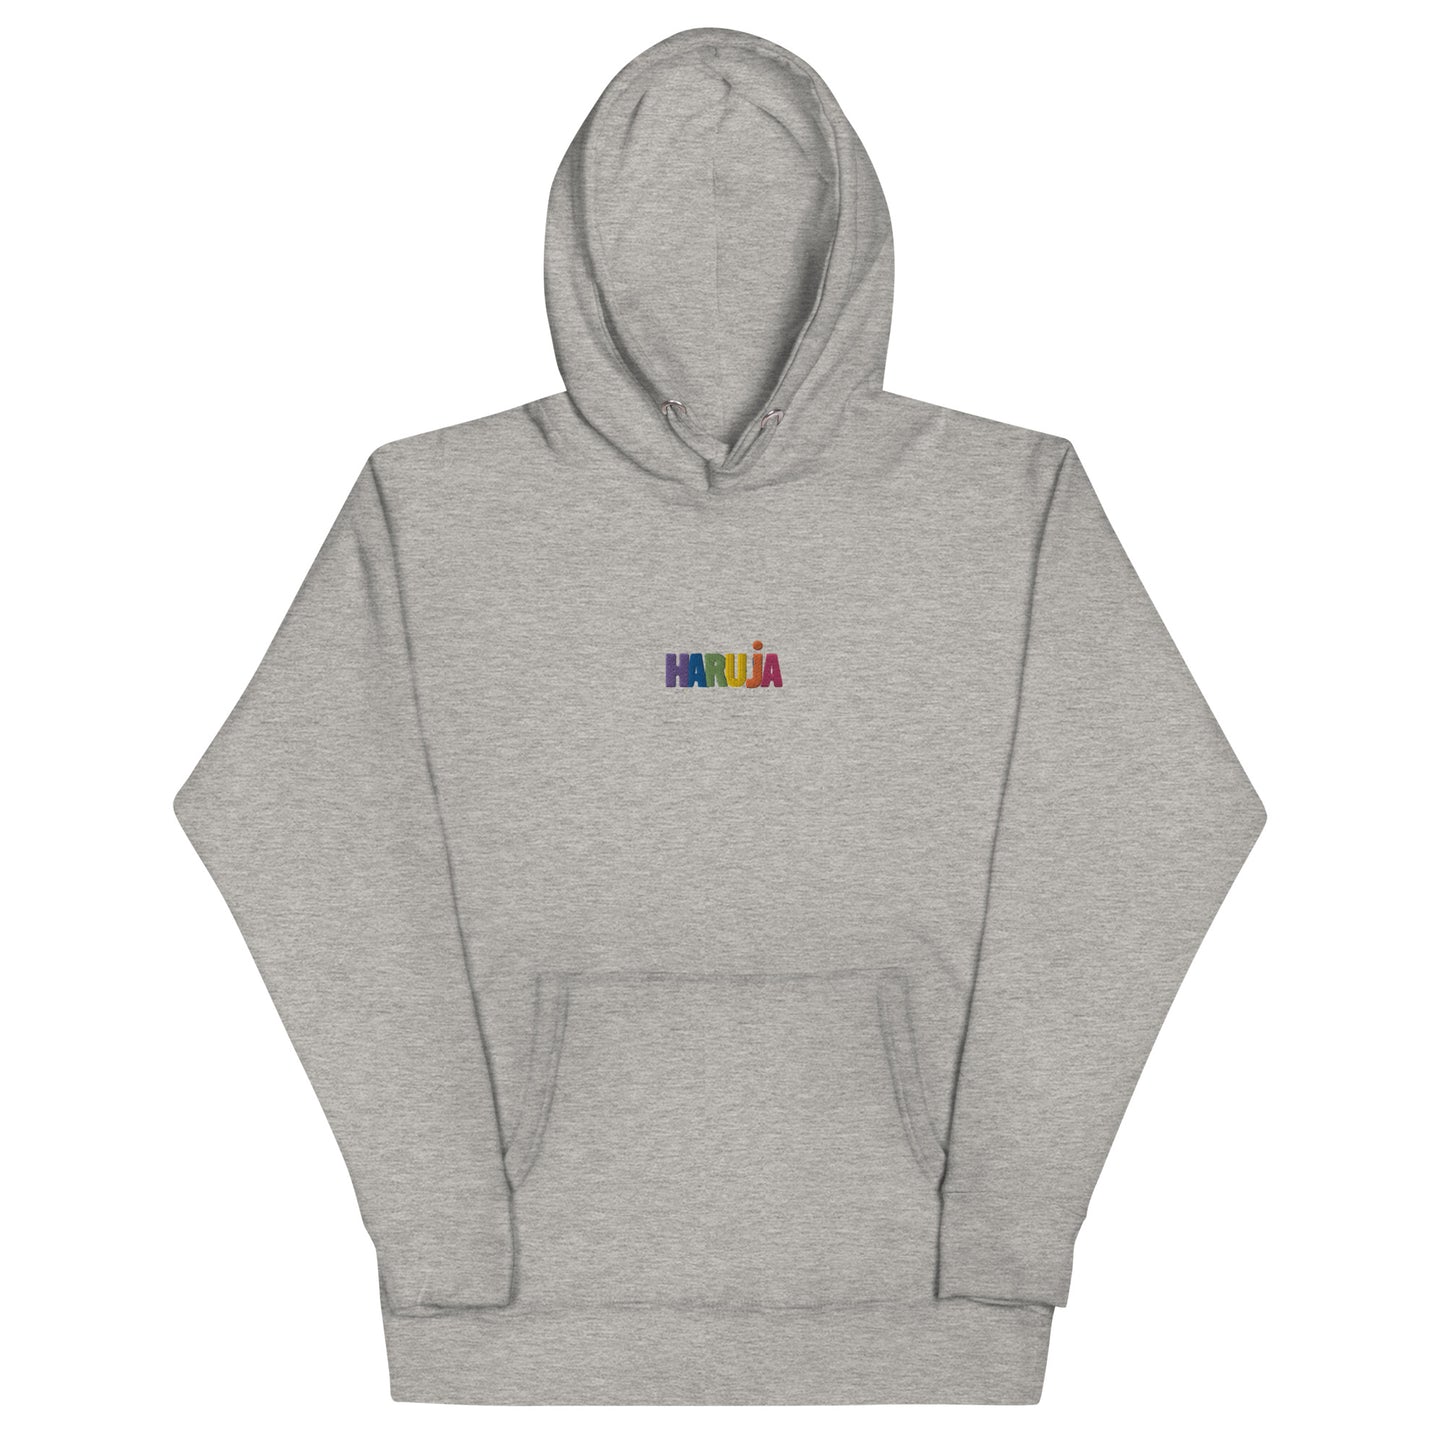 Haruja - Multicolored Embroidered grey hoodie